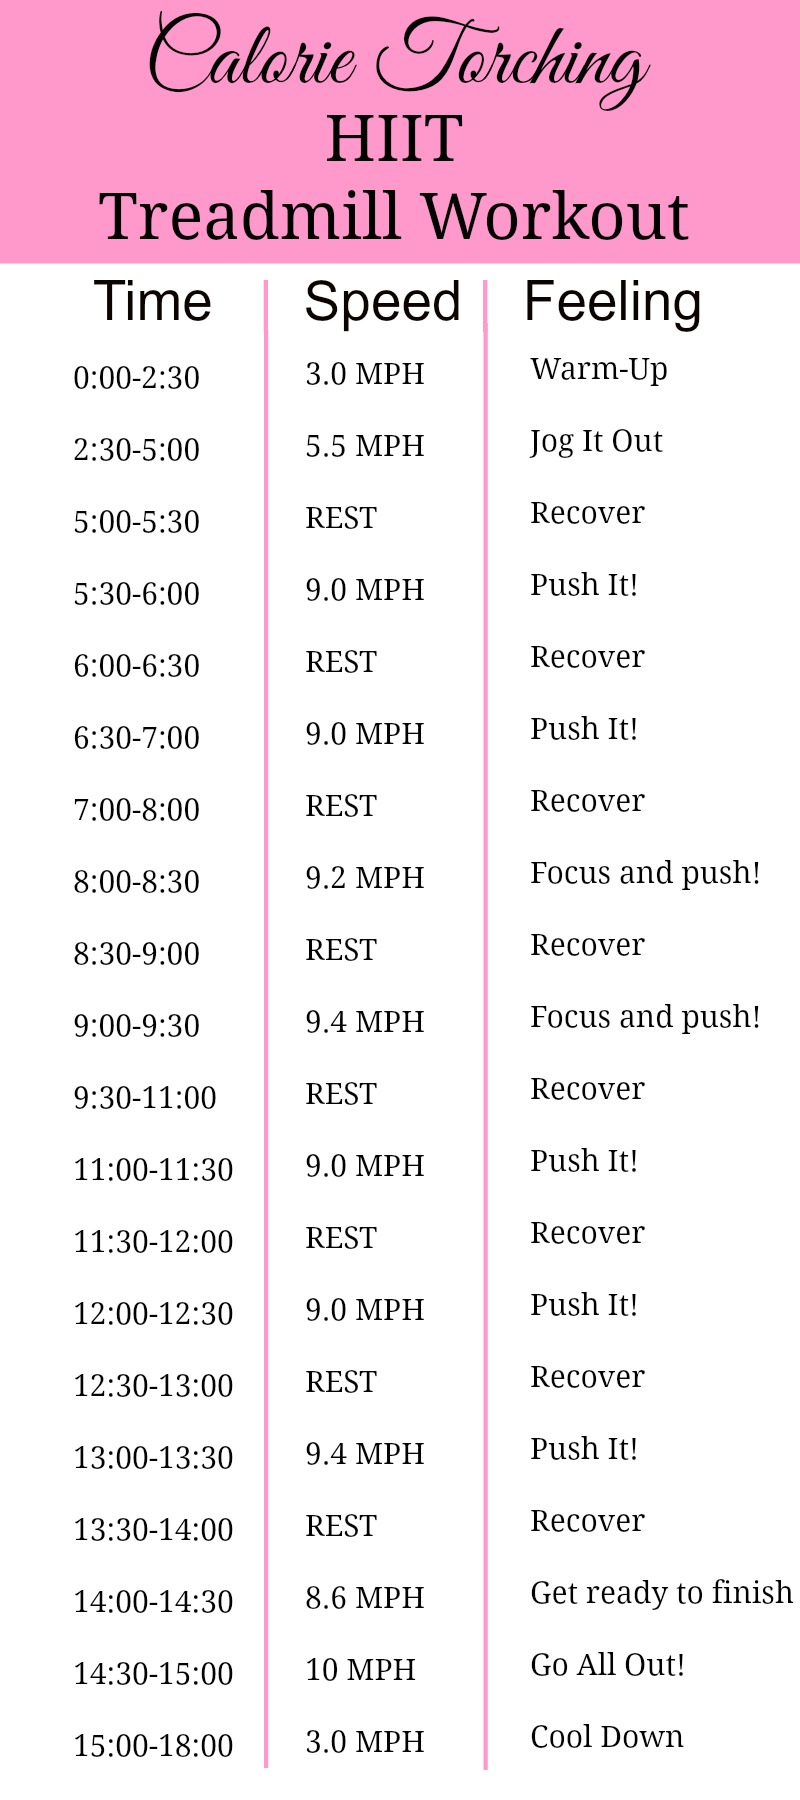 A HIIT treadmill workout that will torch calories and have your legs and lungs burning. #fitness #exercise #workout